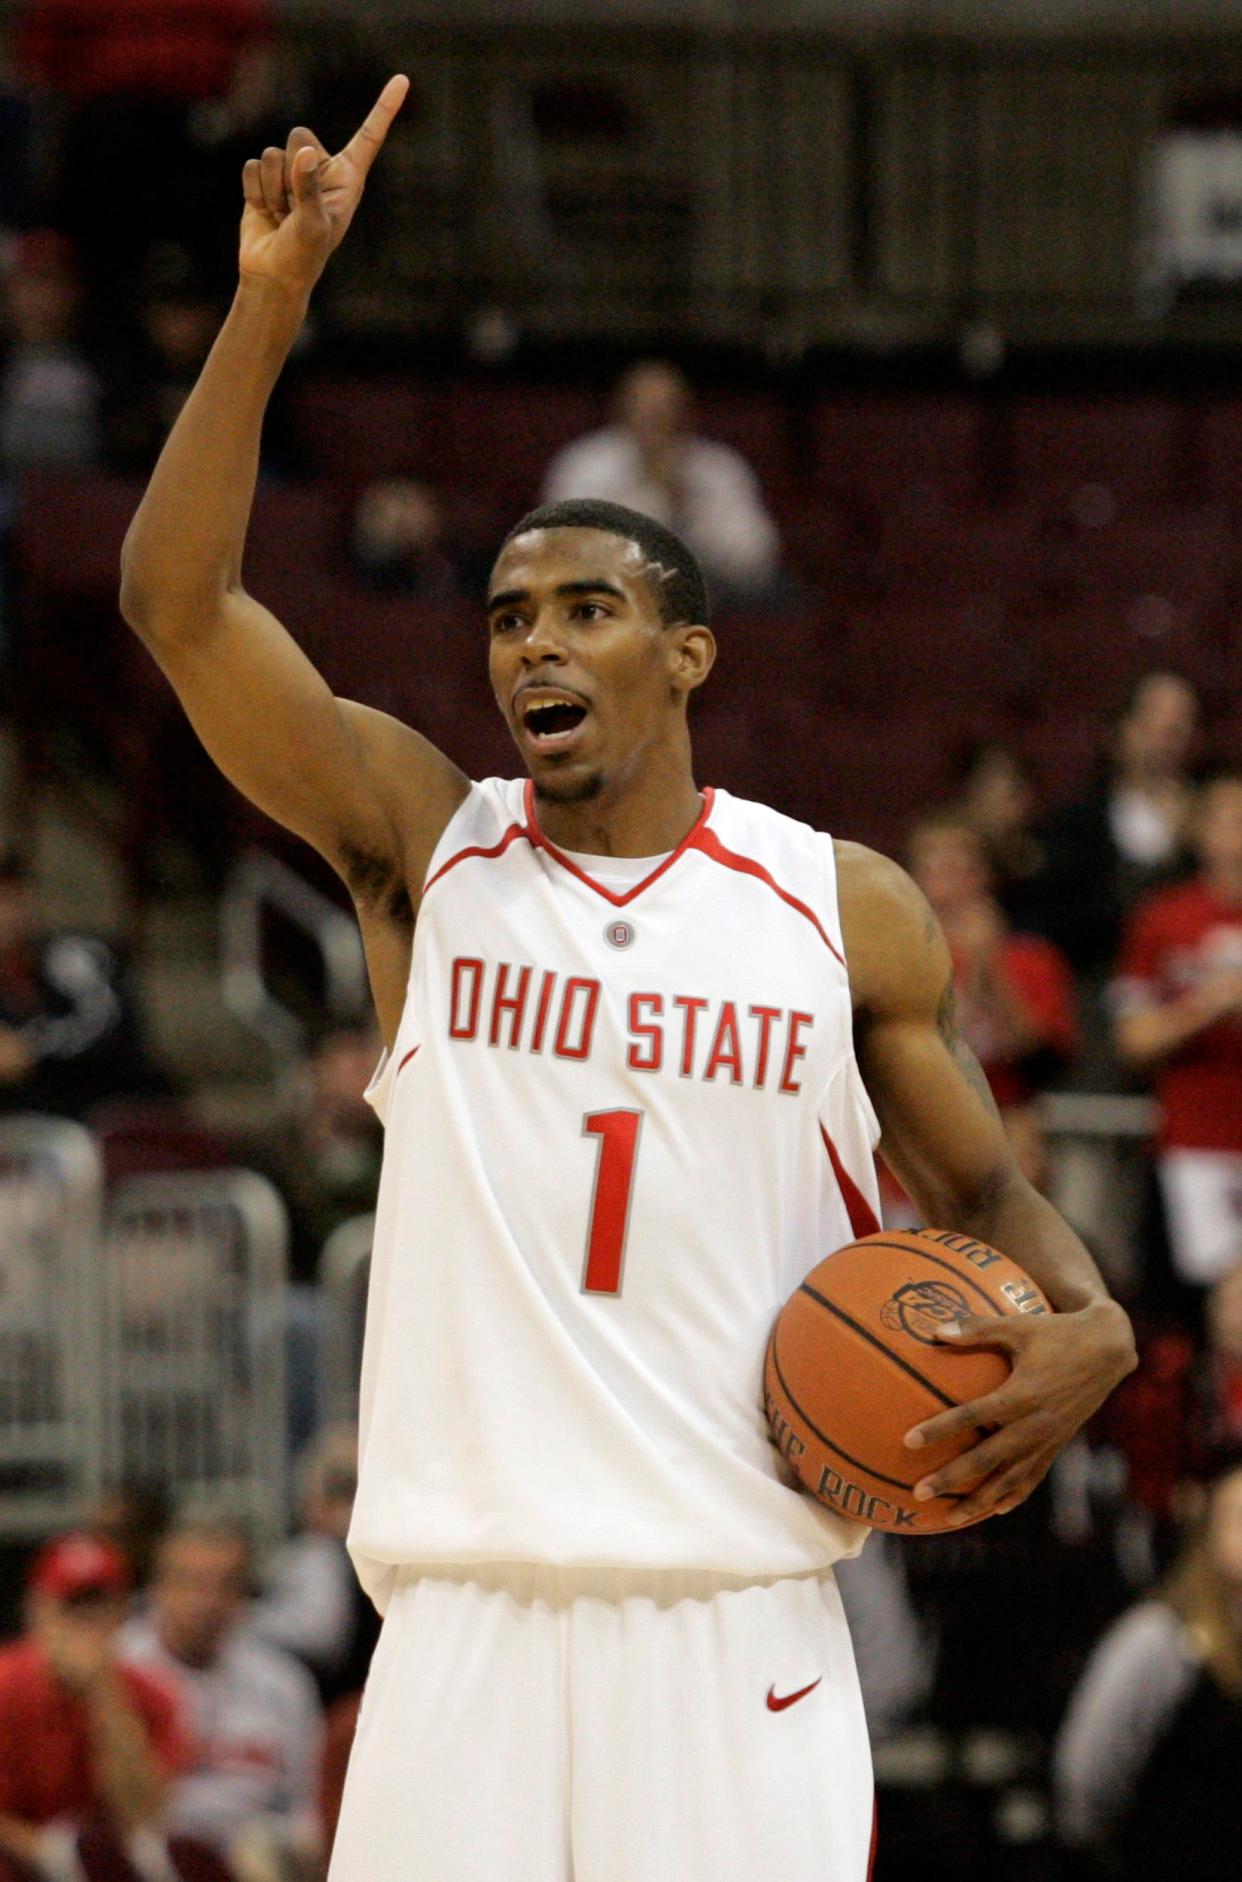 (OSUMEN12 Baptist Cairns 11/11/06) Ohio State freshman guard Mike Conley calls out the play to the offense against Loyola on Nov. 11, 2006. (Adam Cairns / Columbus Dispatch)